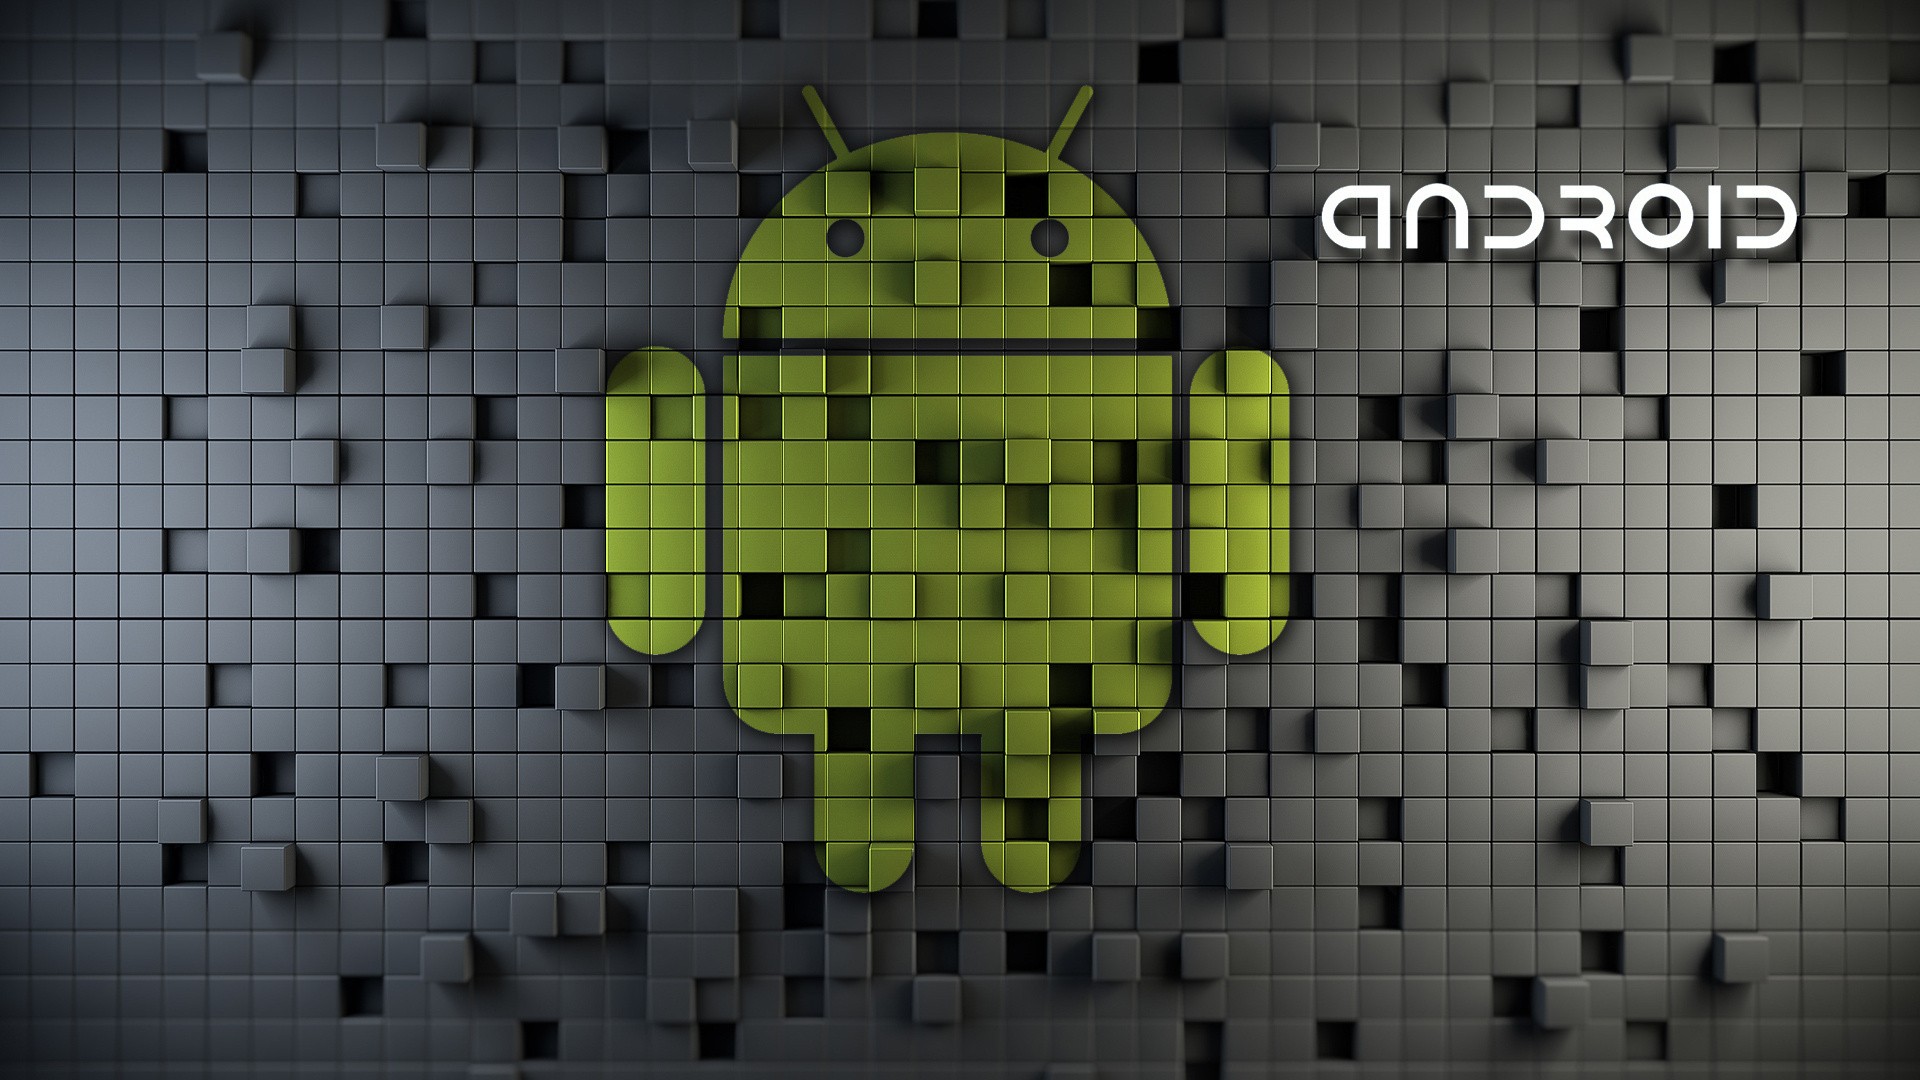 android-dev